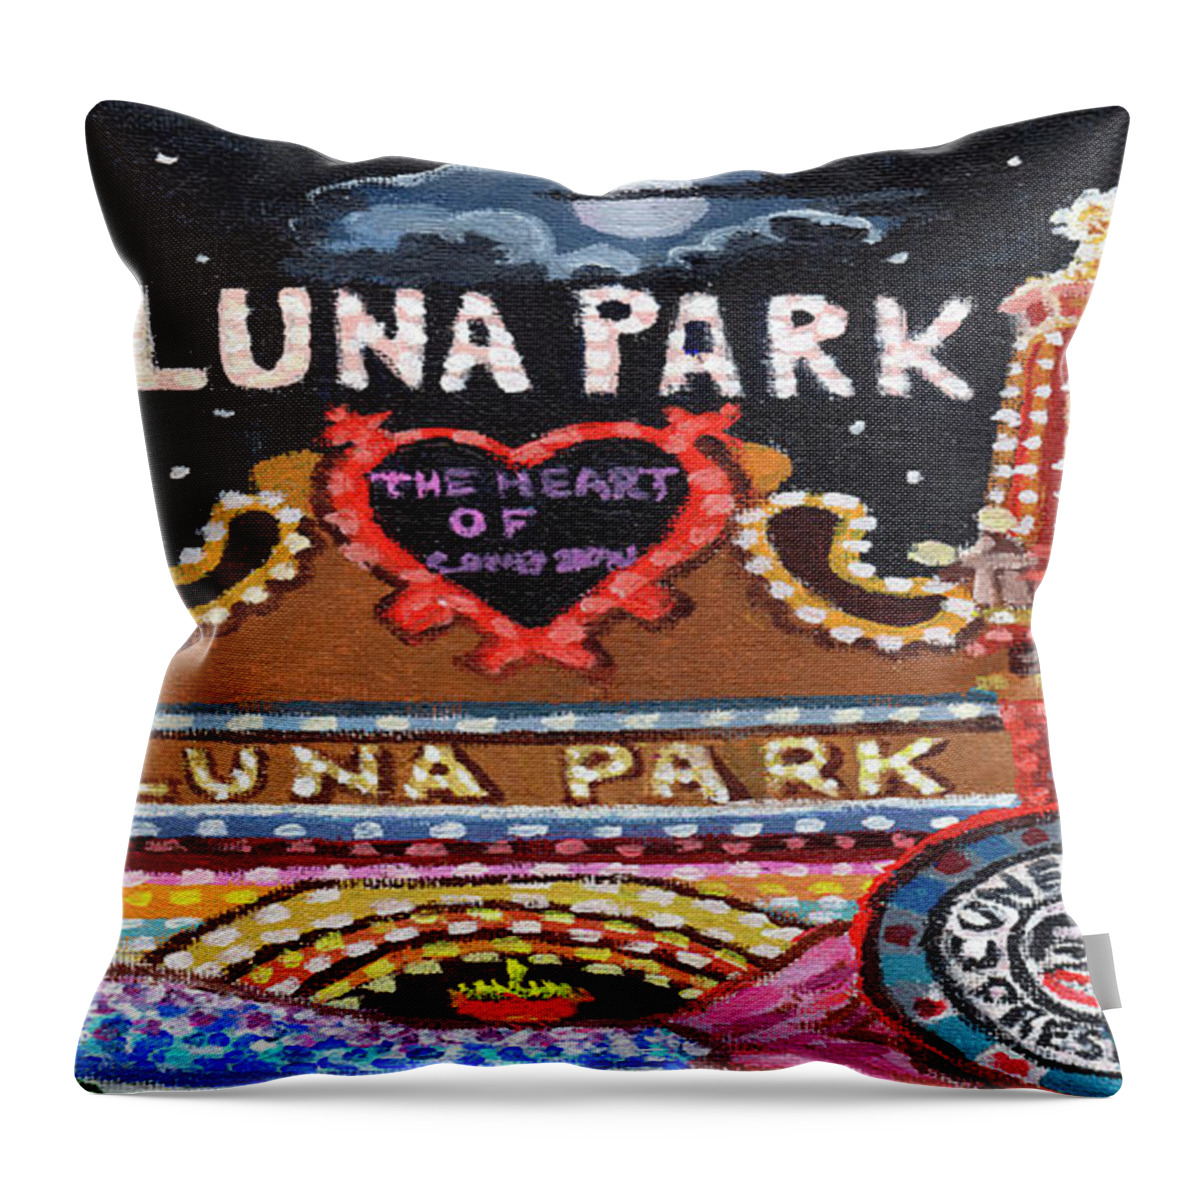 Luna Park At Night Throw Pillow featuring the painting Luna Park Towel Version by Bonnie Siracusa